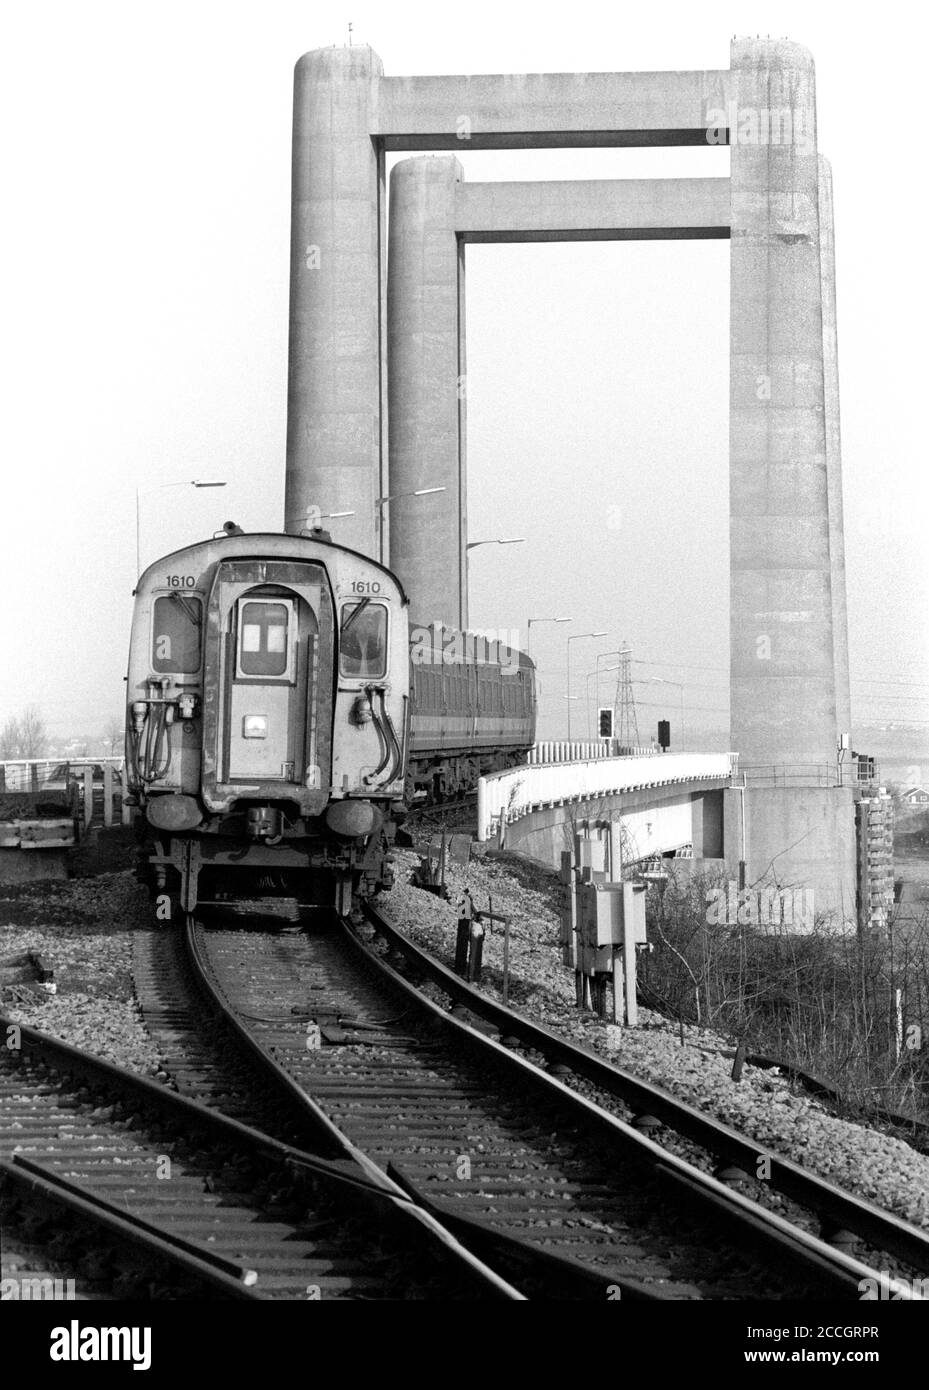 A Class 411 4-Cep electric multiple unit number 1610 rolls off the Kingsferry Bridge towards Swale with Network SouthEast service on the 28th December 1991. Stock Photo